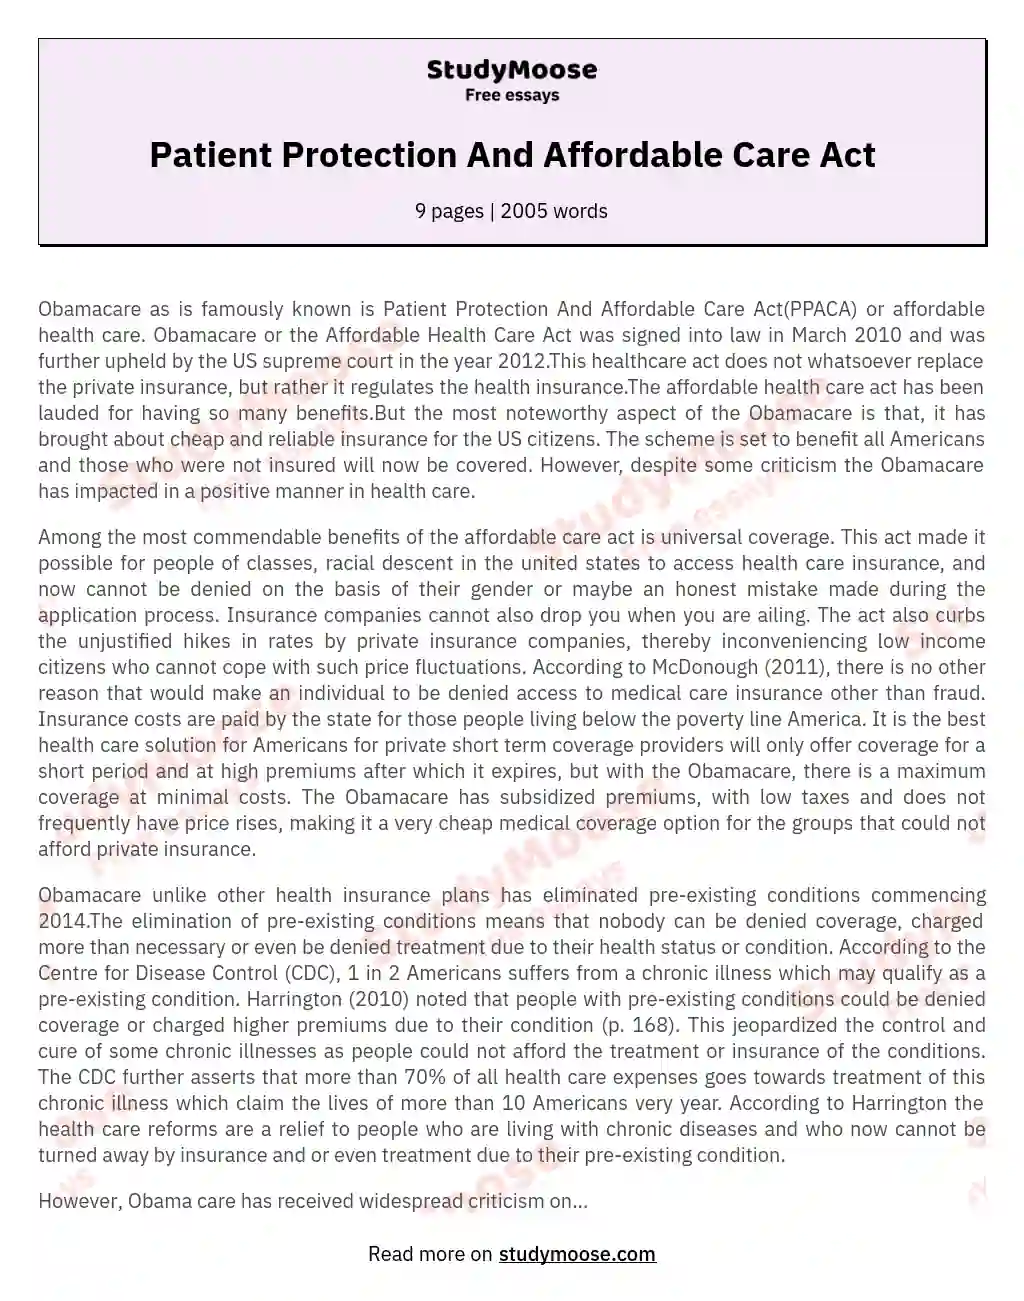 Patient Protection And Affordable Care Act